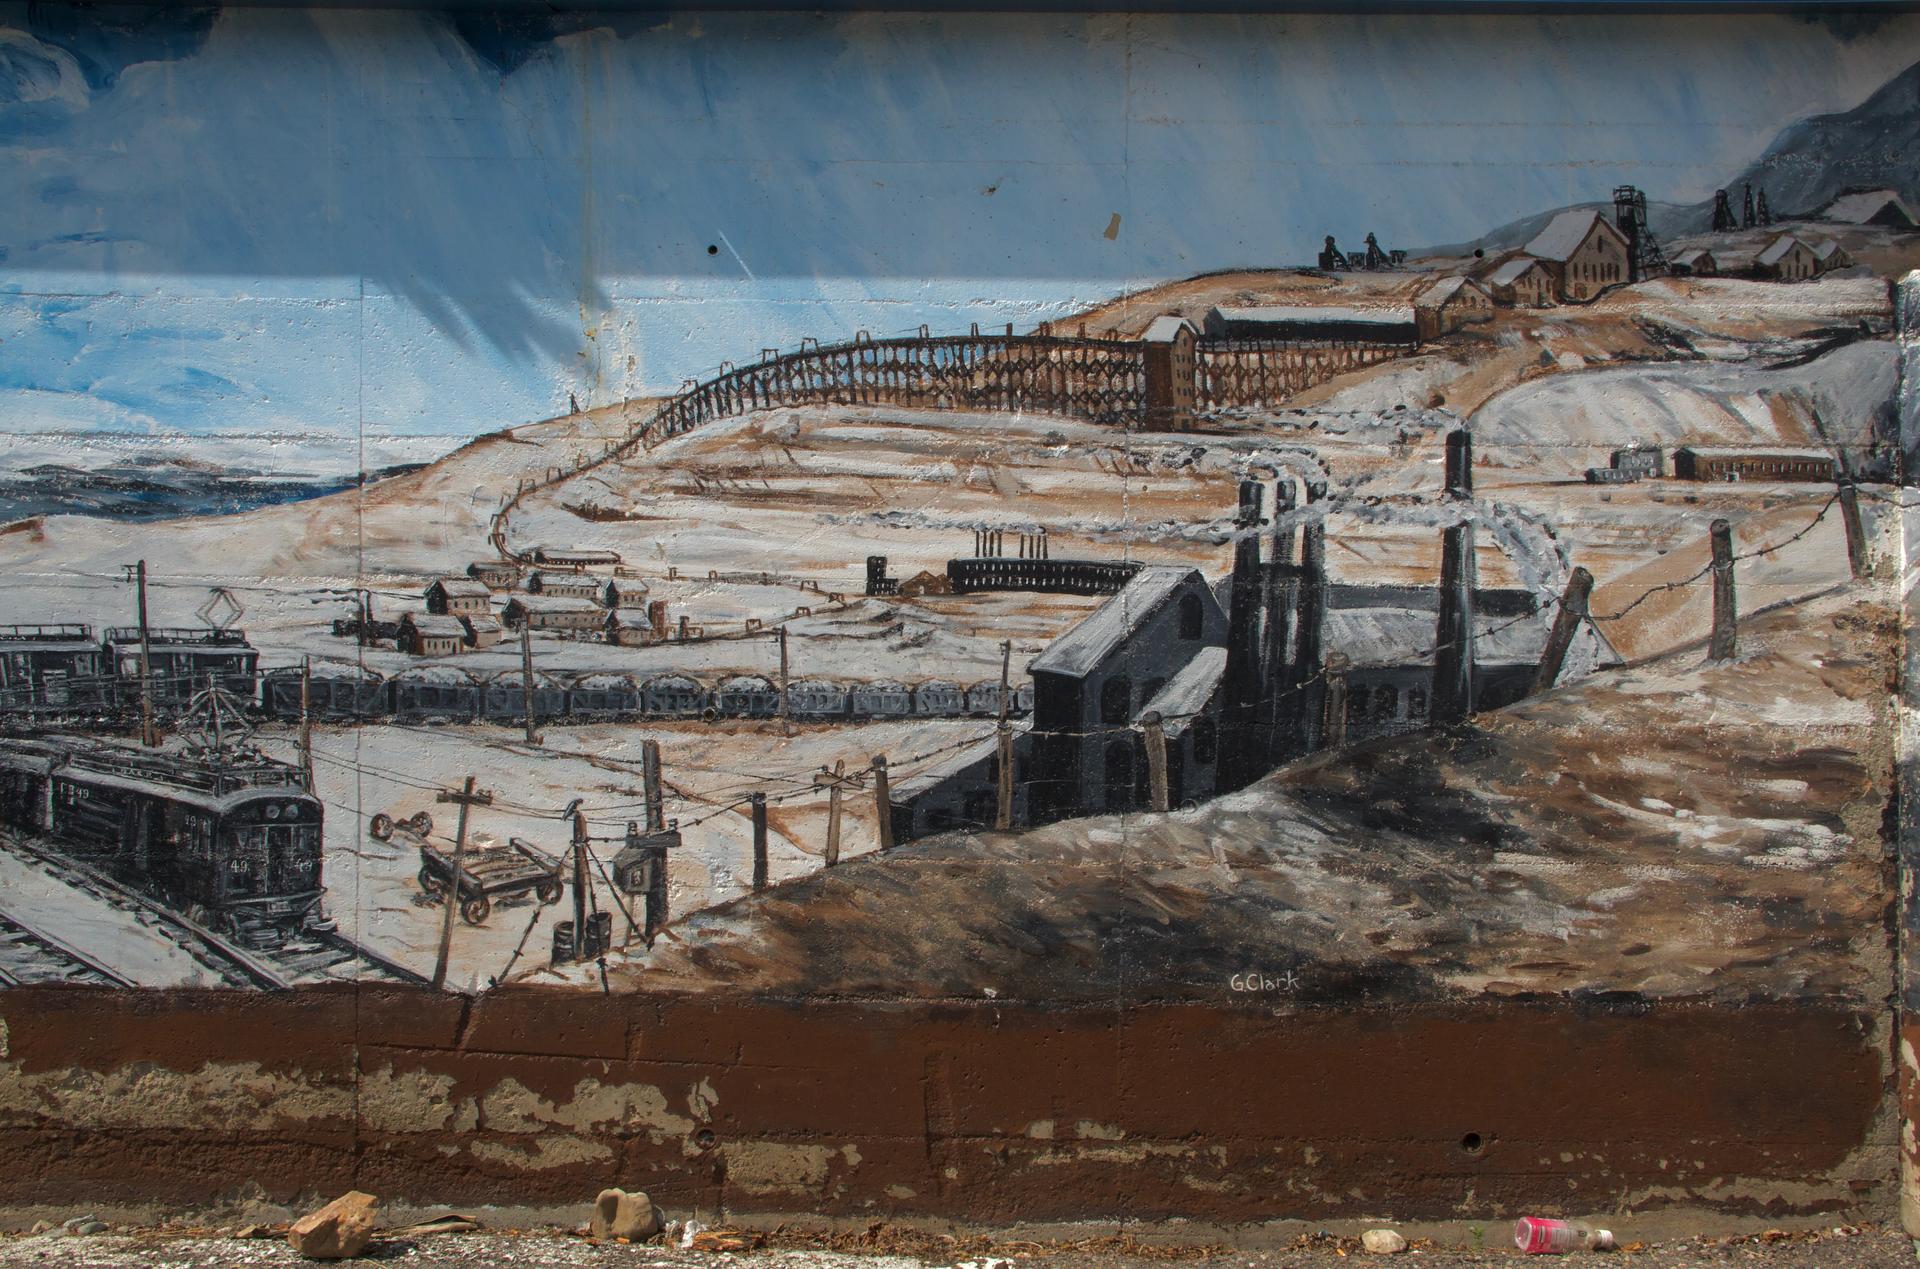 Photograph of landscape mural depicting the settler copper industry in Butte, Montana in the early twentieth century. A shadow of a plant is visible against the mural’s blue-painted sky. In front of the mural, pieces of trash lie strewn about.